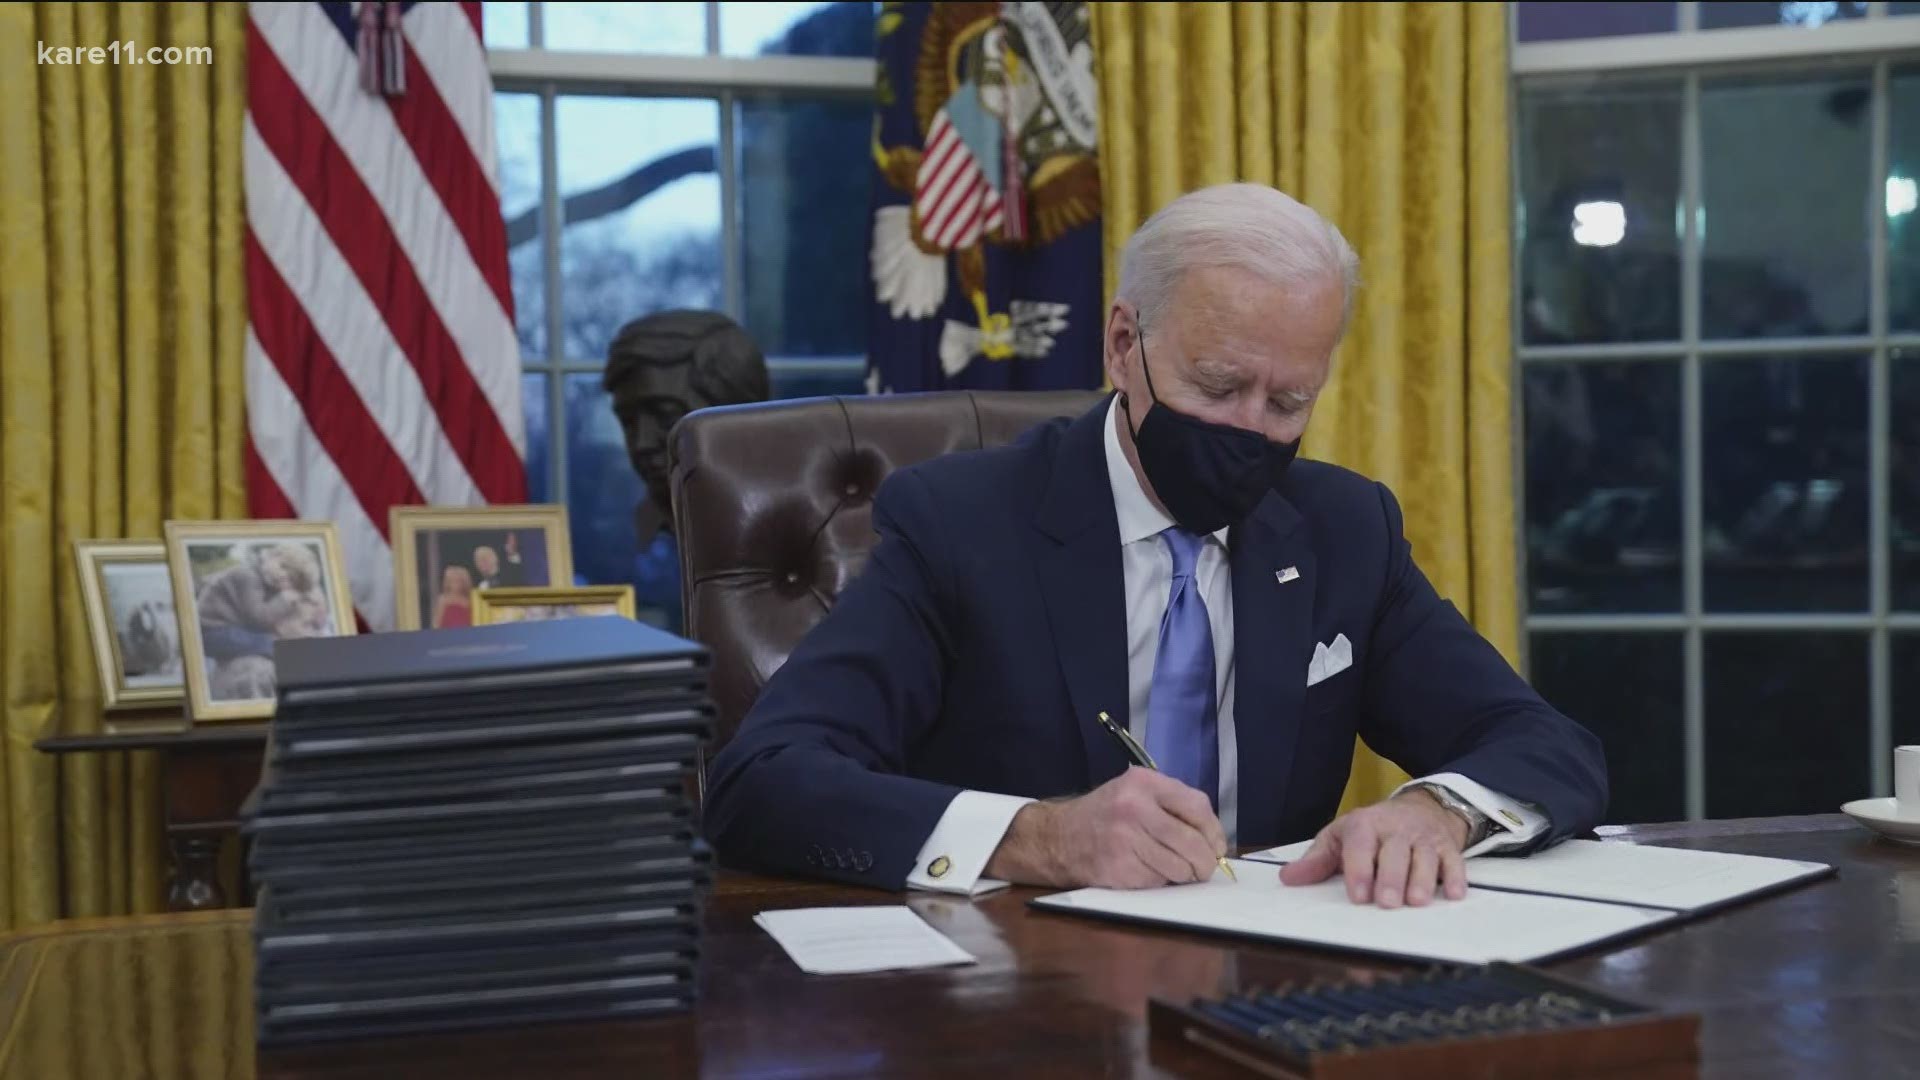 Biden sets agenda on Day One with executive actions | kare11.com